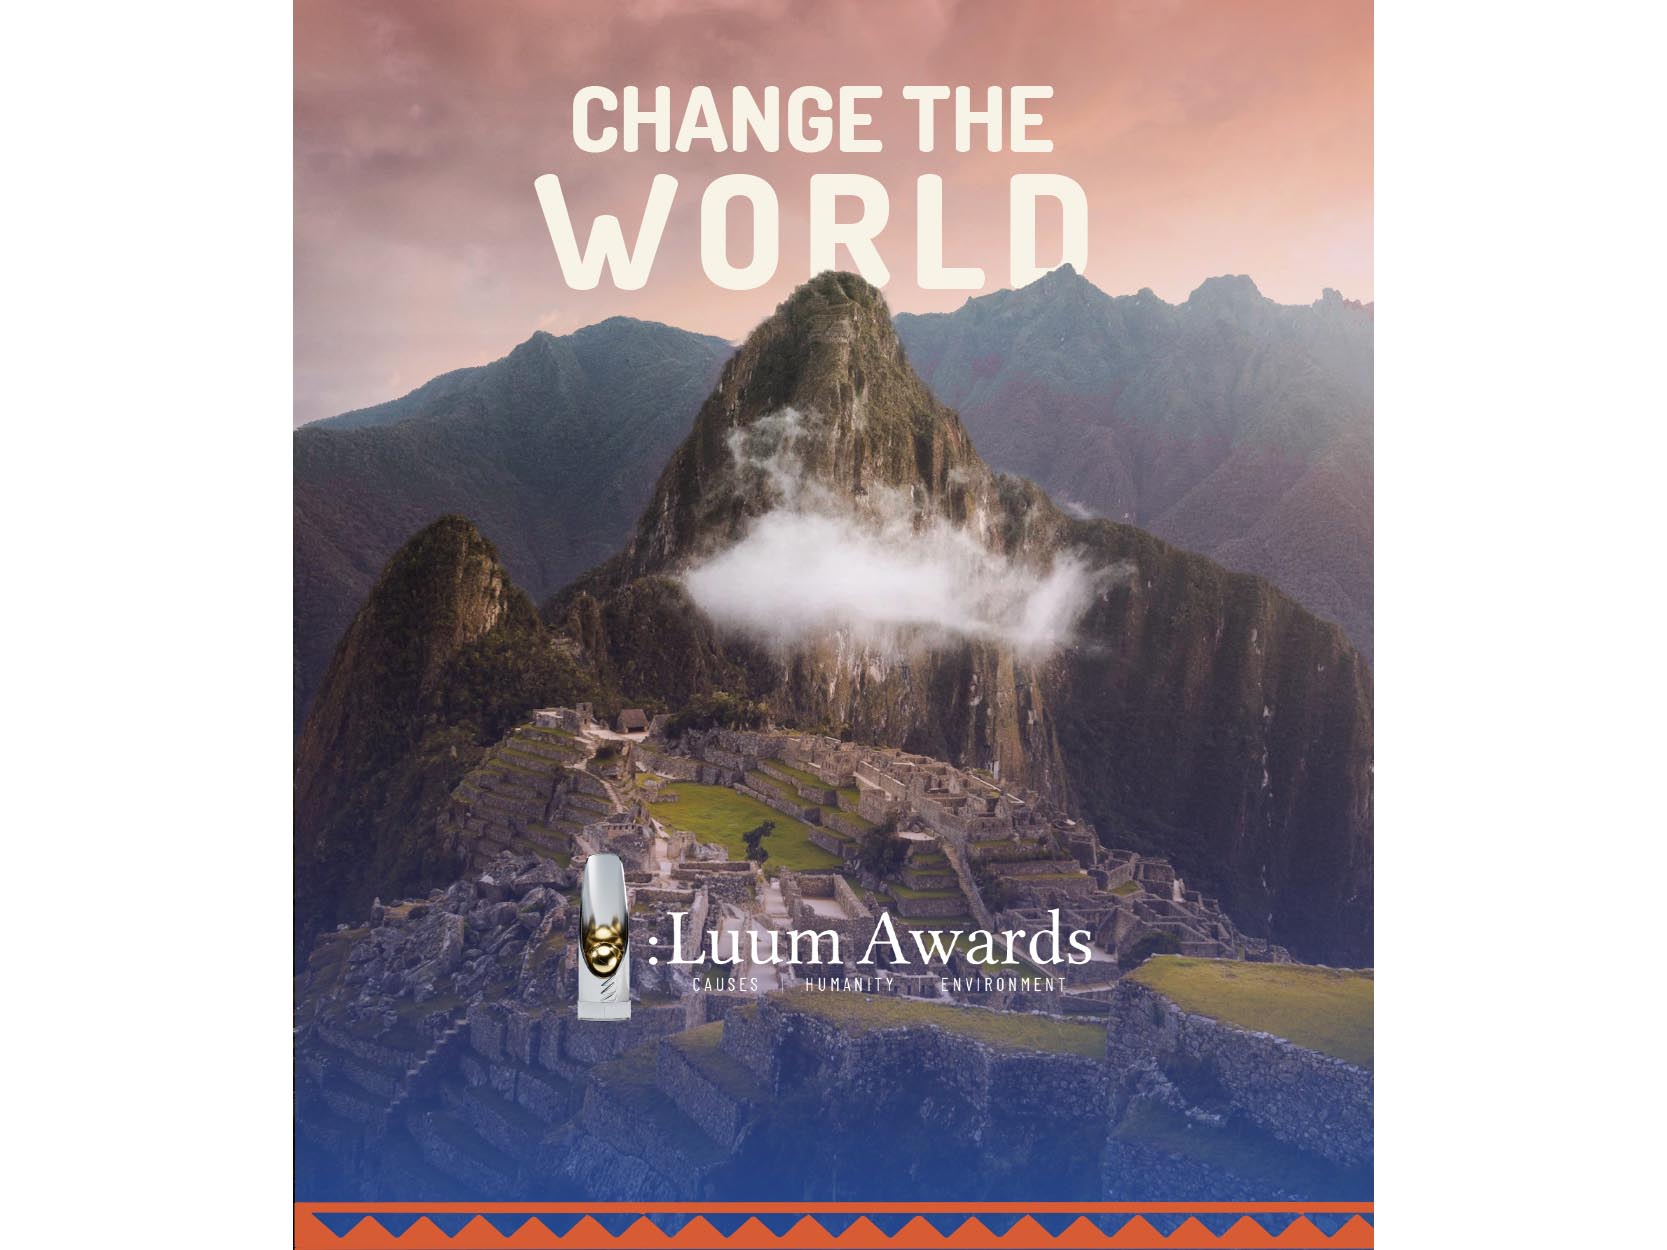 Luum Awards presents a special edition that aligns with the festival’s DNA: a Summit in Peru’s Sacred Valley